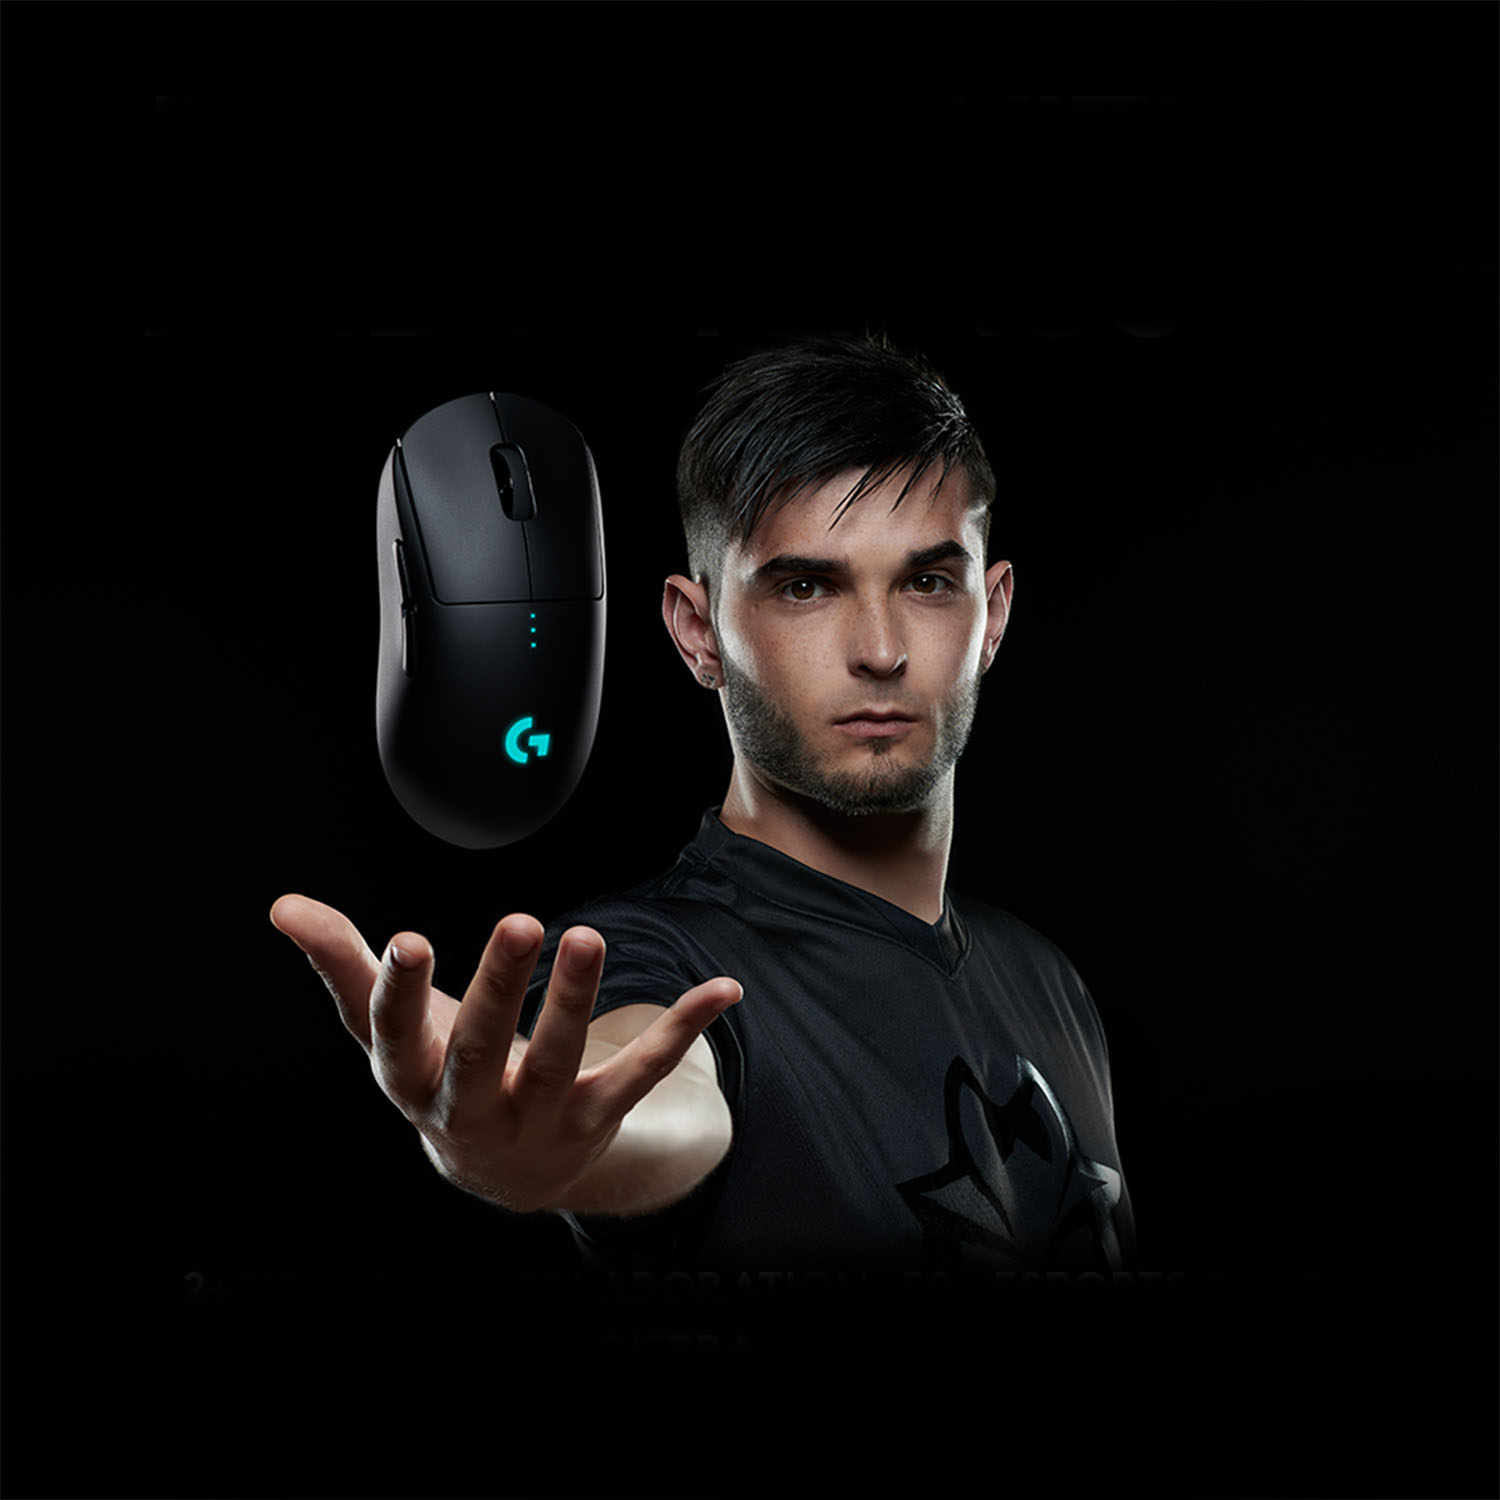 My favorite gaming mouse is the Logitech G Pro Wireless - Polygon